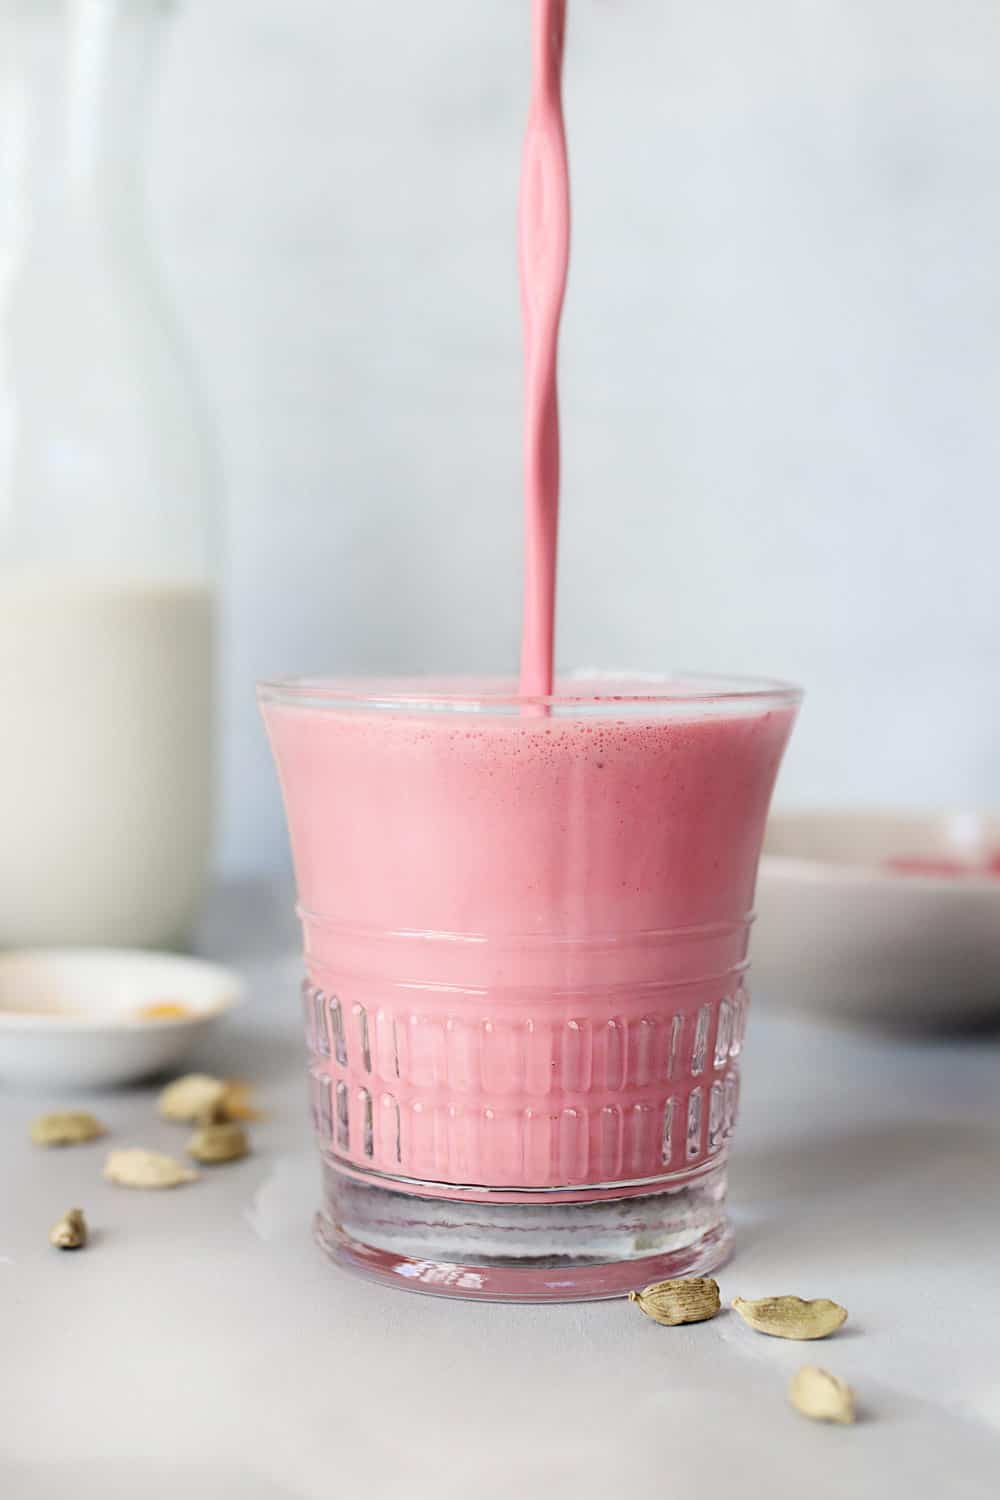 12 All-Natural Pink and Red Recipes That Are Still a Treat - Warming Ayurvedic Pink Velvet Latte